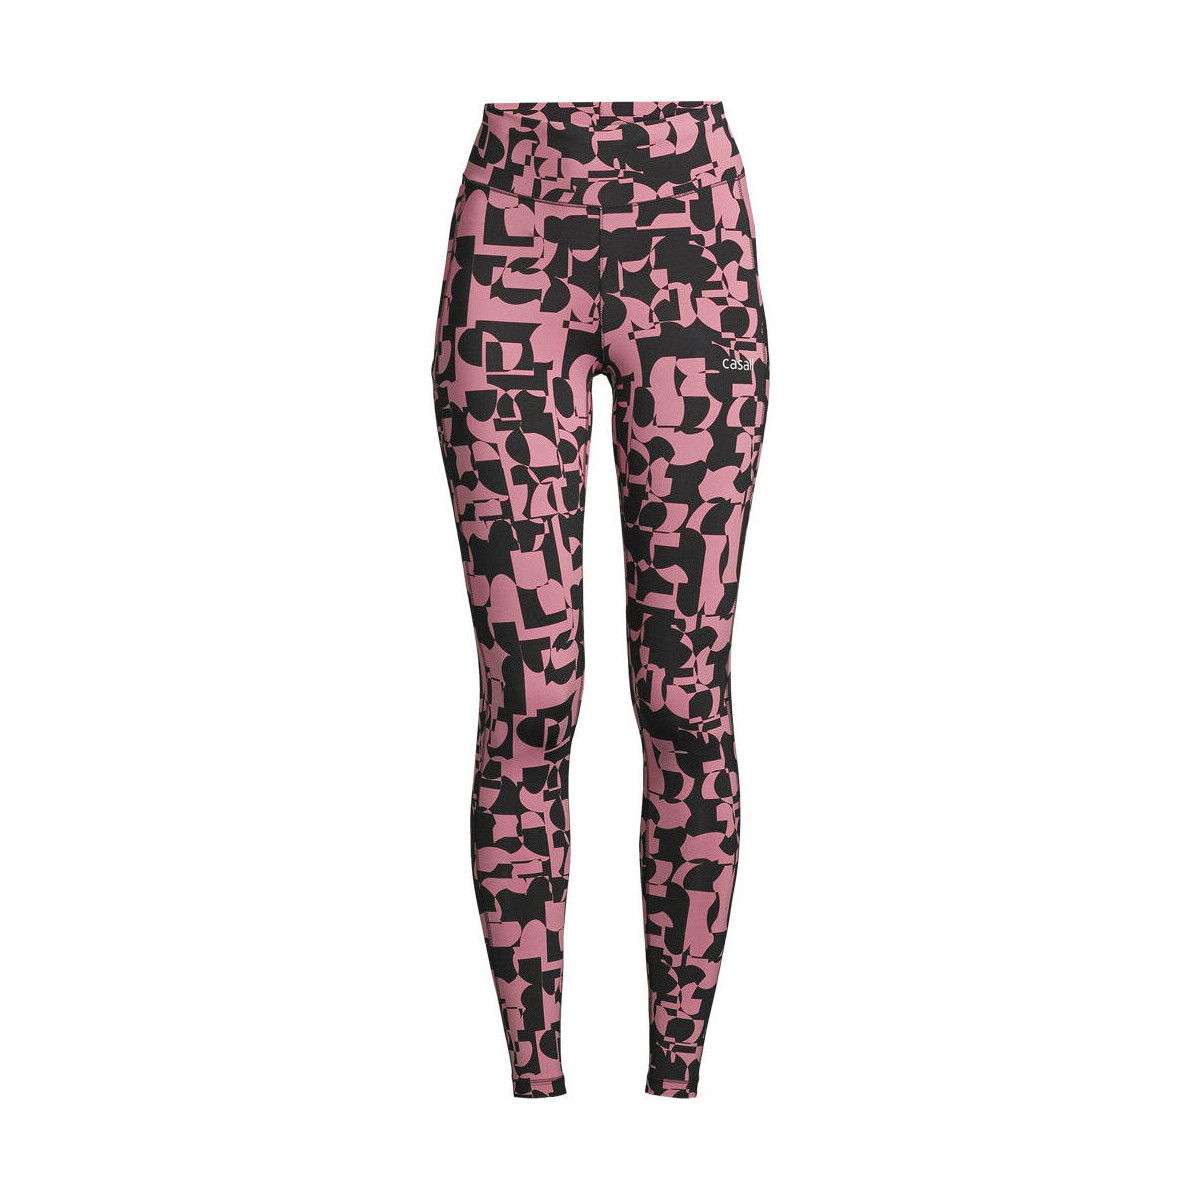 Vêtements Femme Sweats Casall Essential Tights Printed Rose